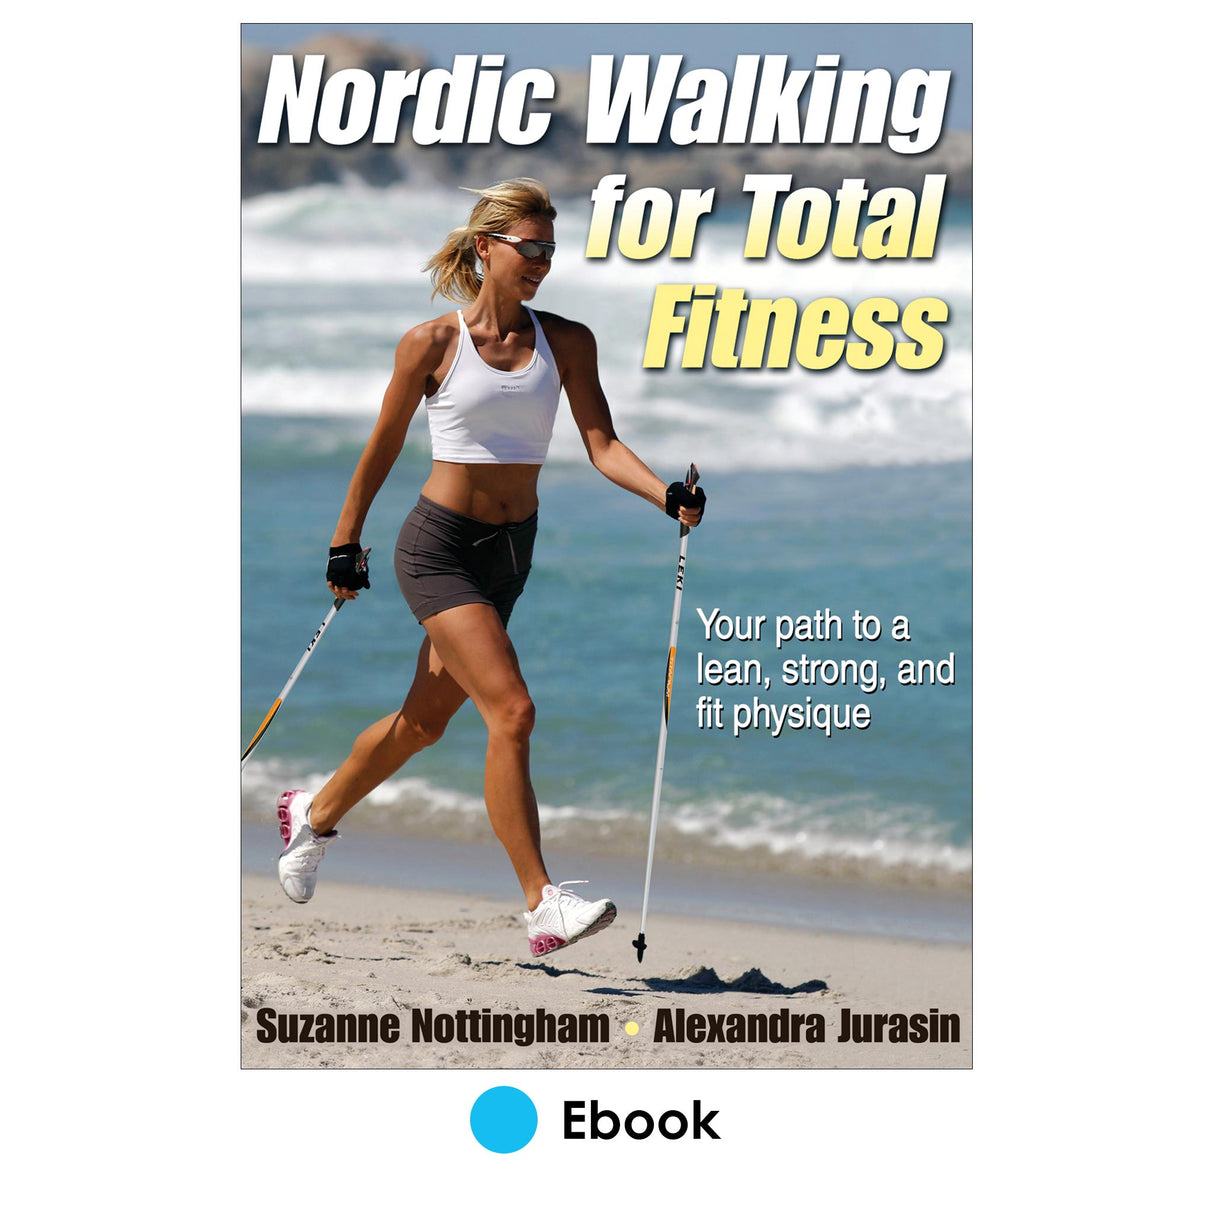 Nordic Walking for Total Fitness PDF